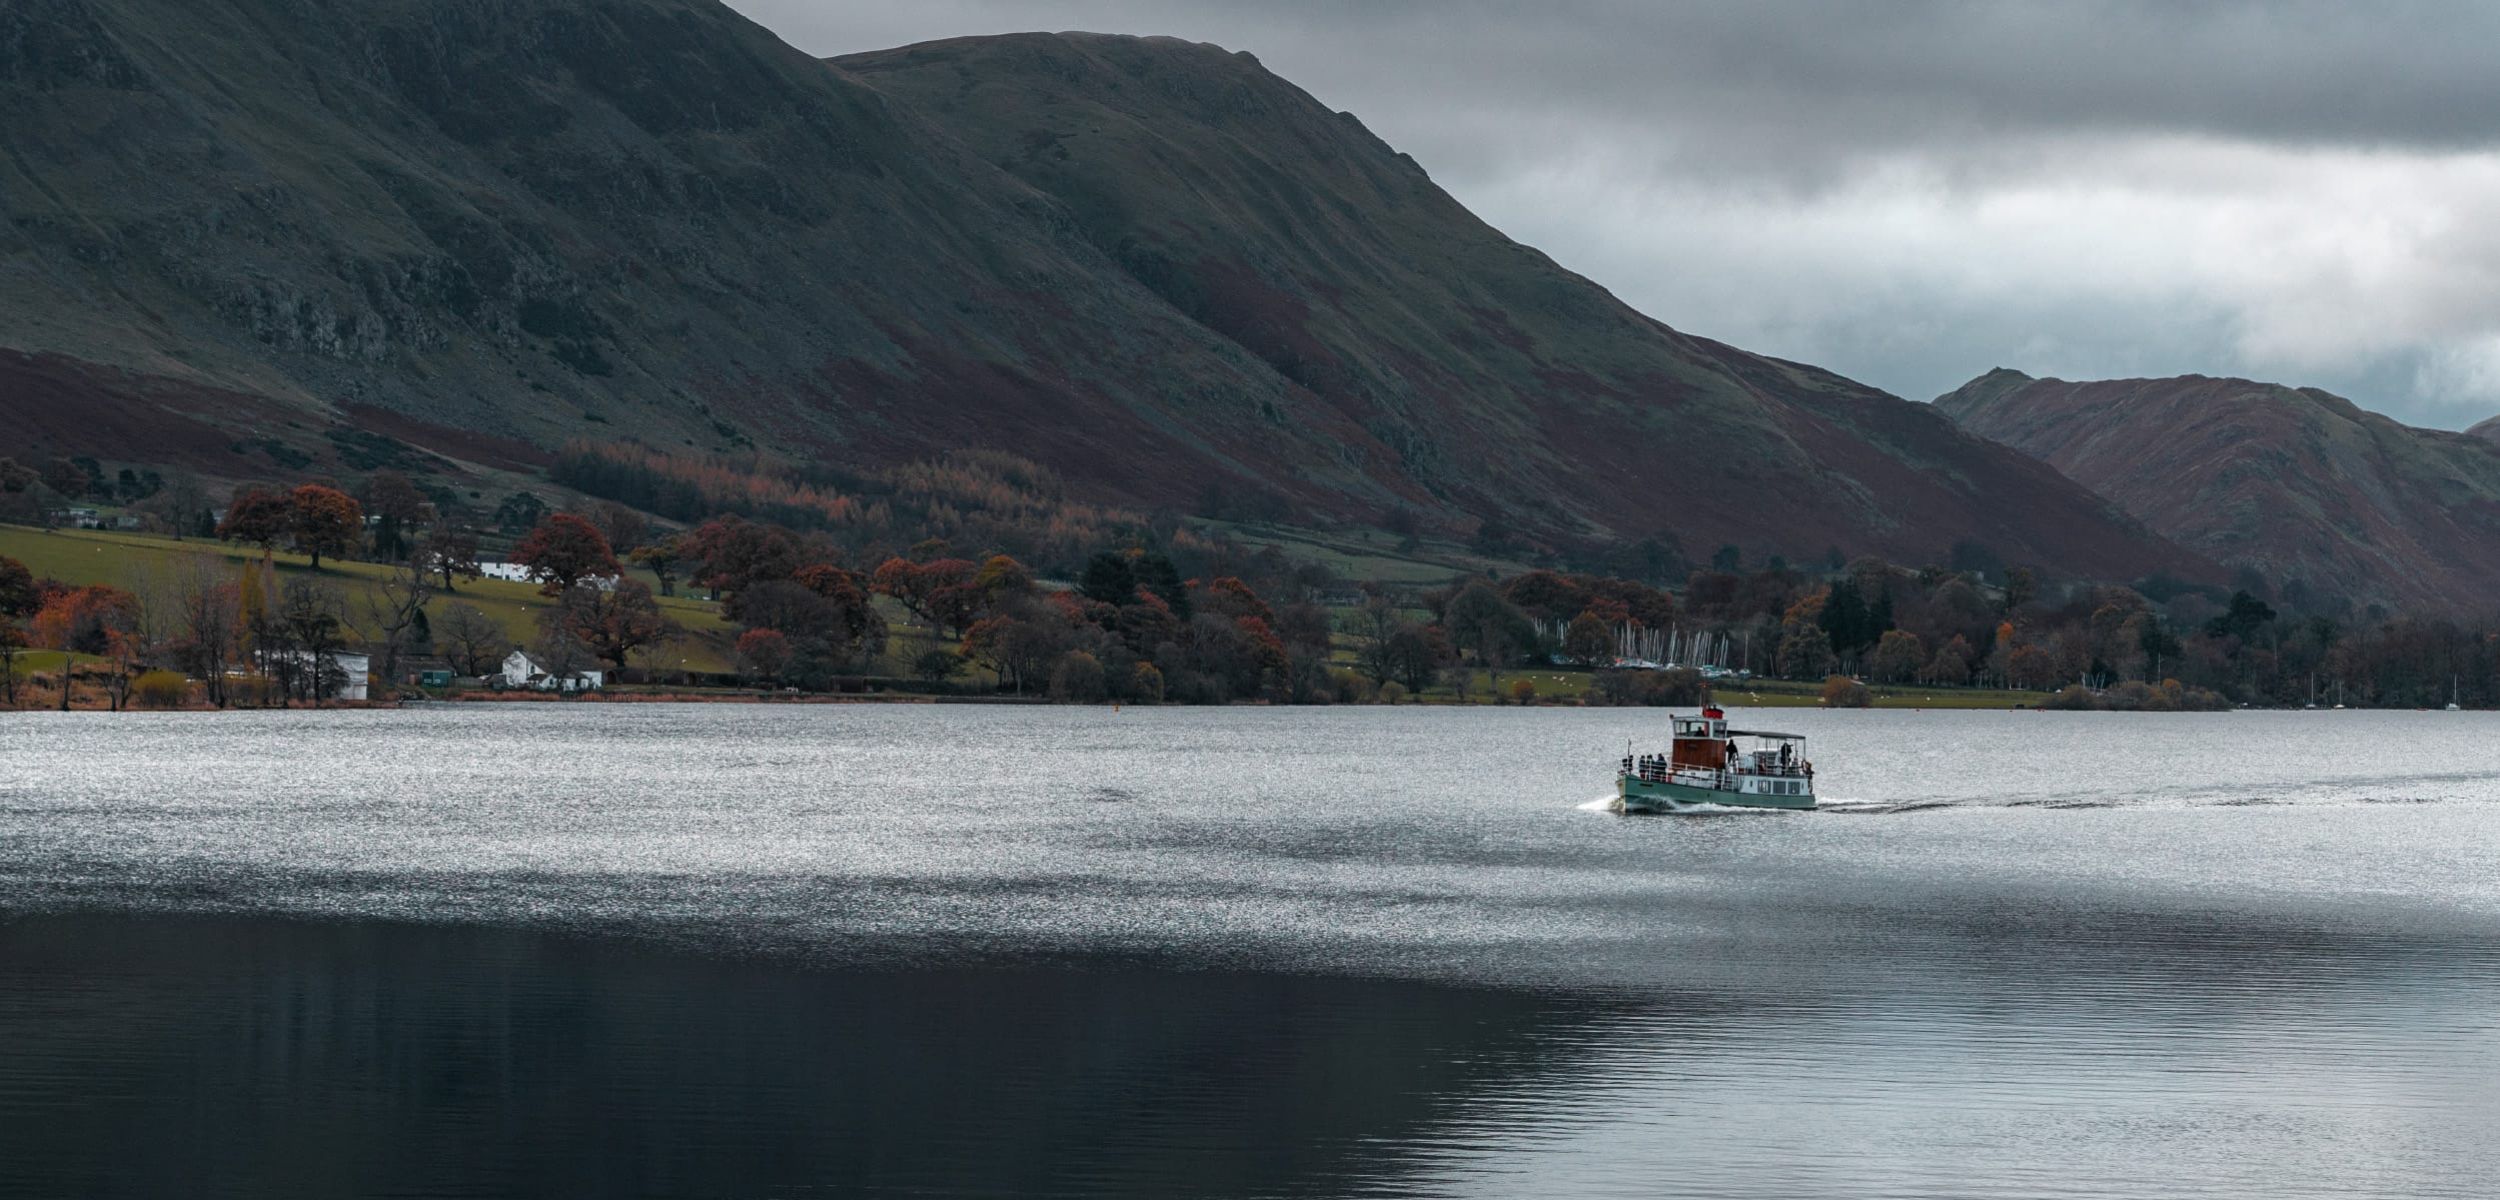 An unforgettable Lake District experience